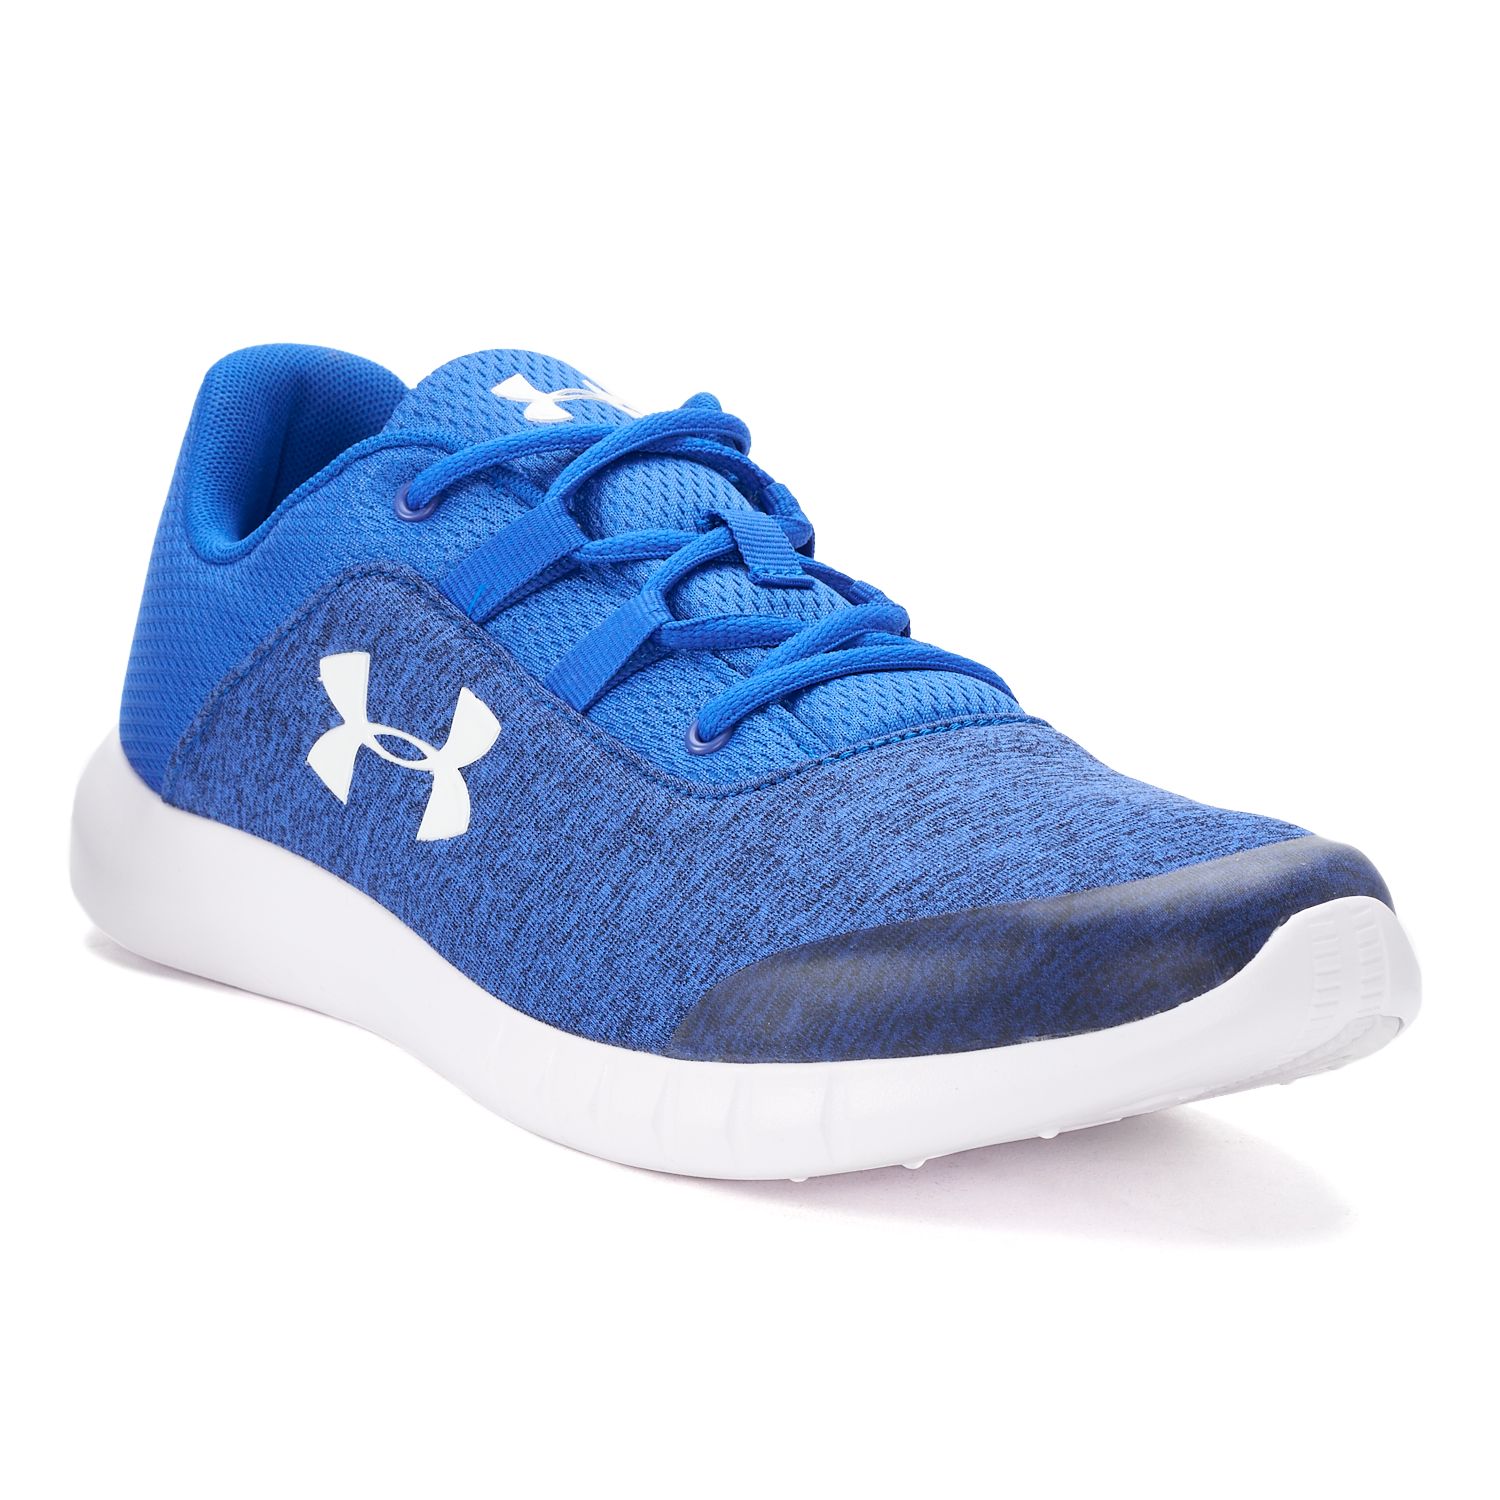 under armour mojo women's running shoes